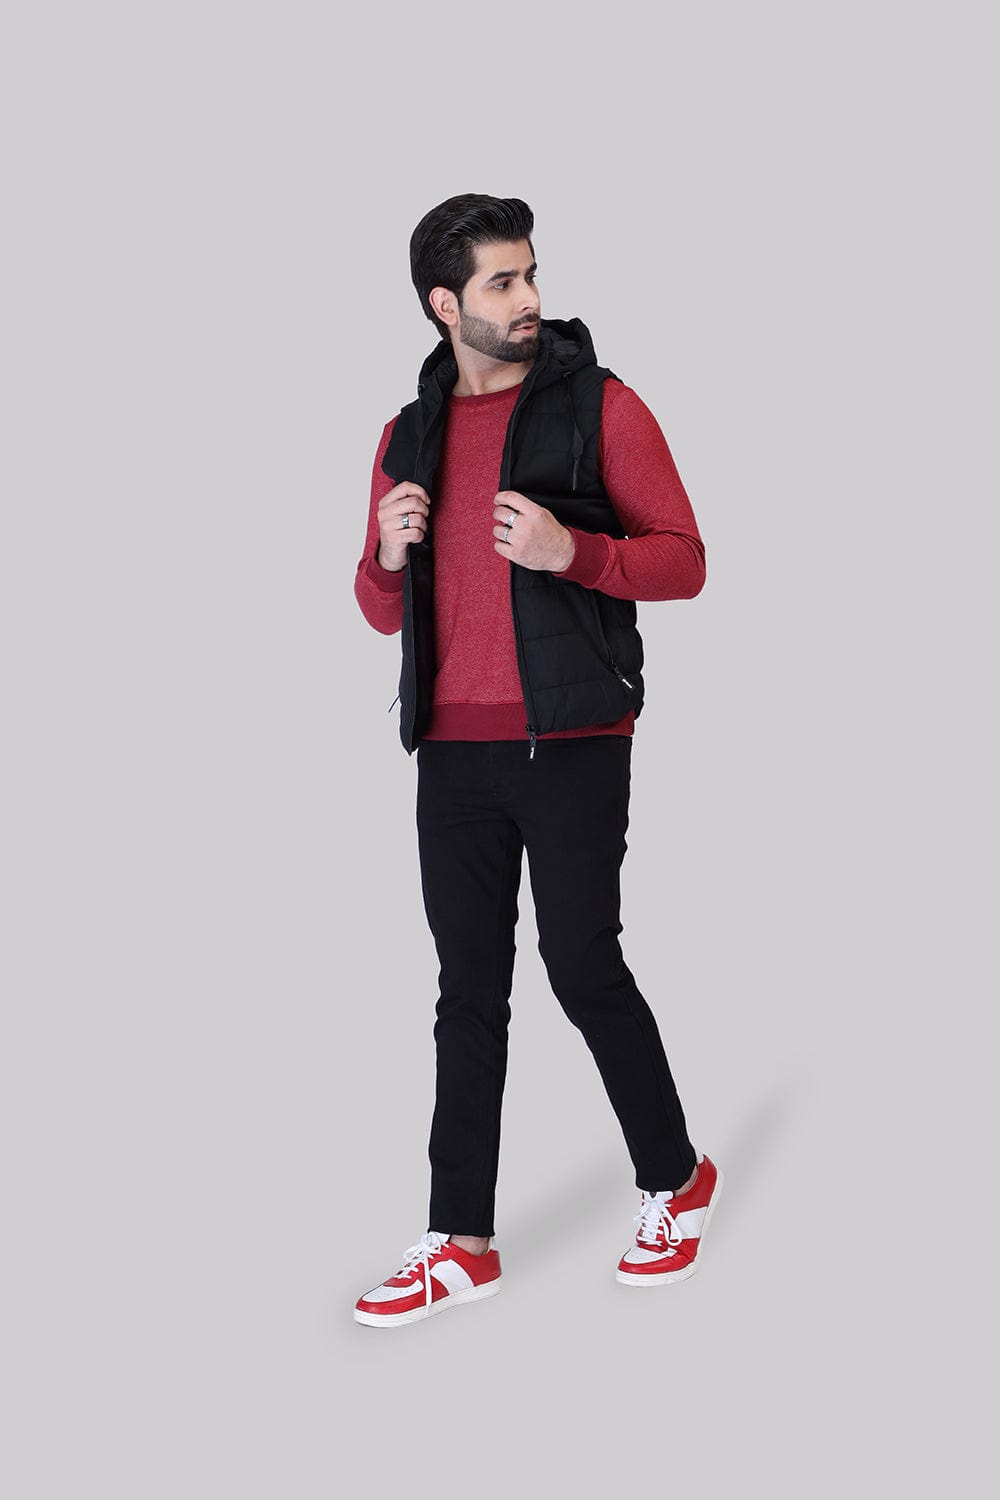 Hope Not Out by Shahid Afridi Men Jacket Sleeveless Puffer With Hood